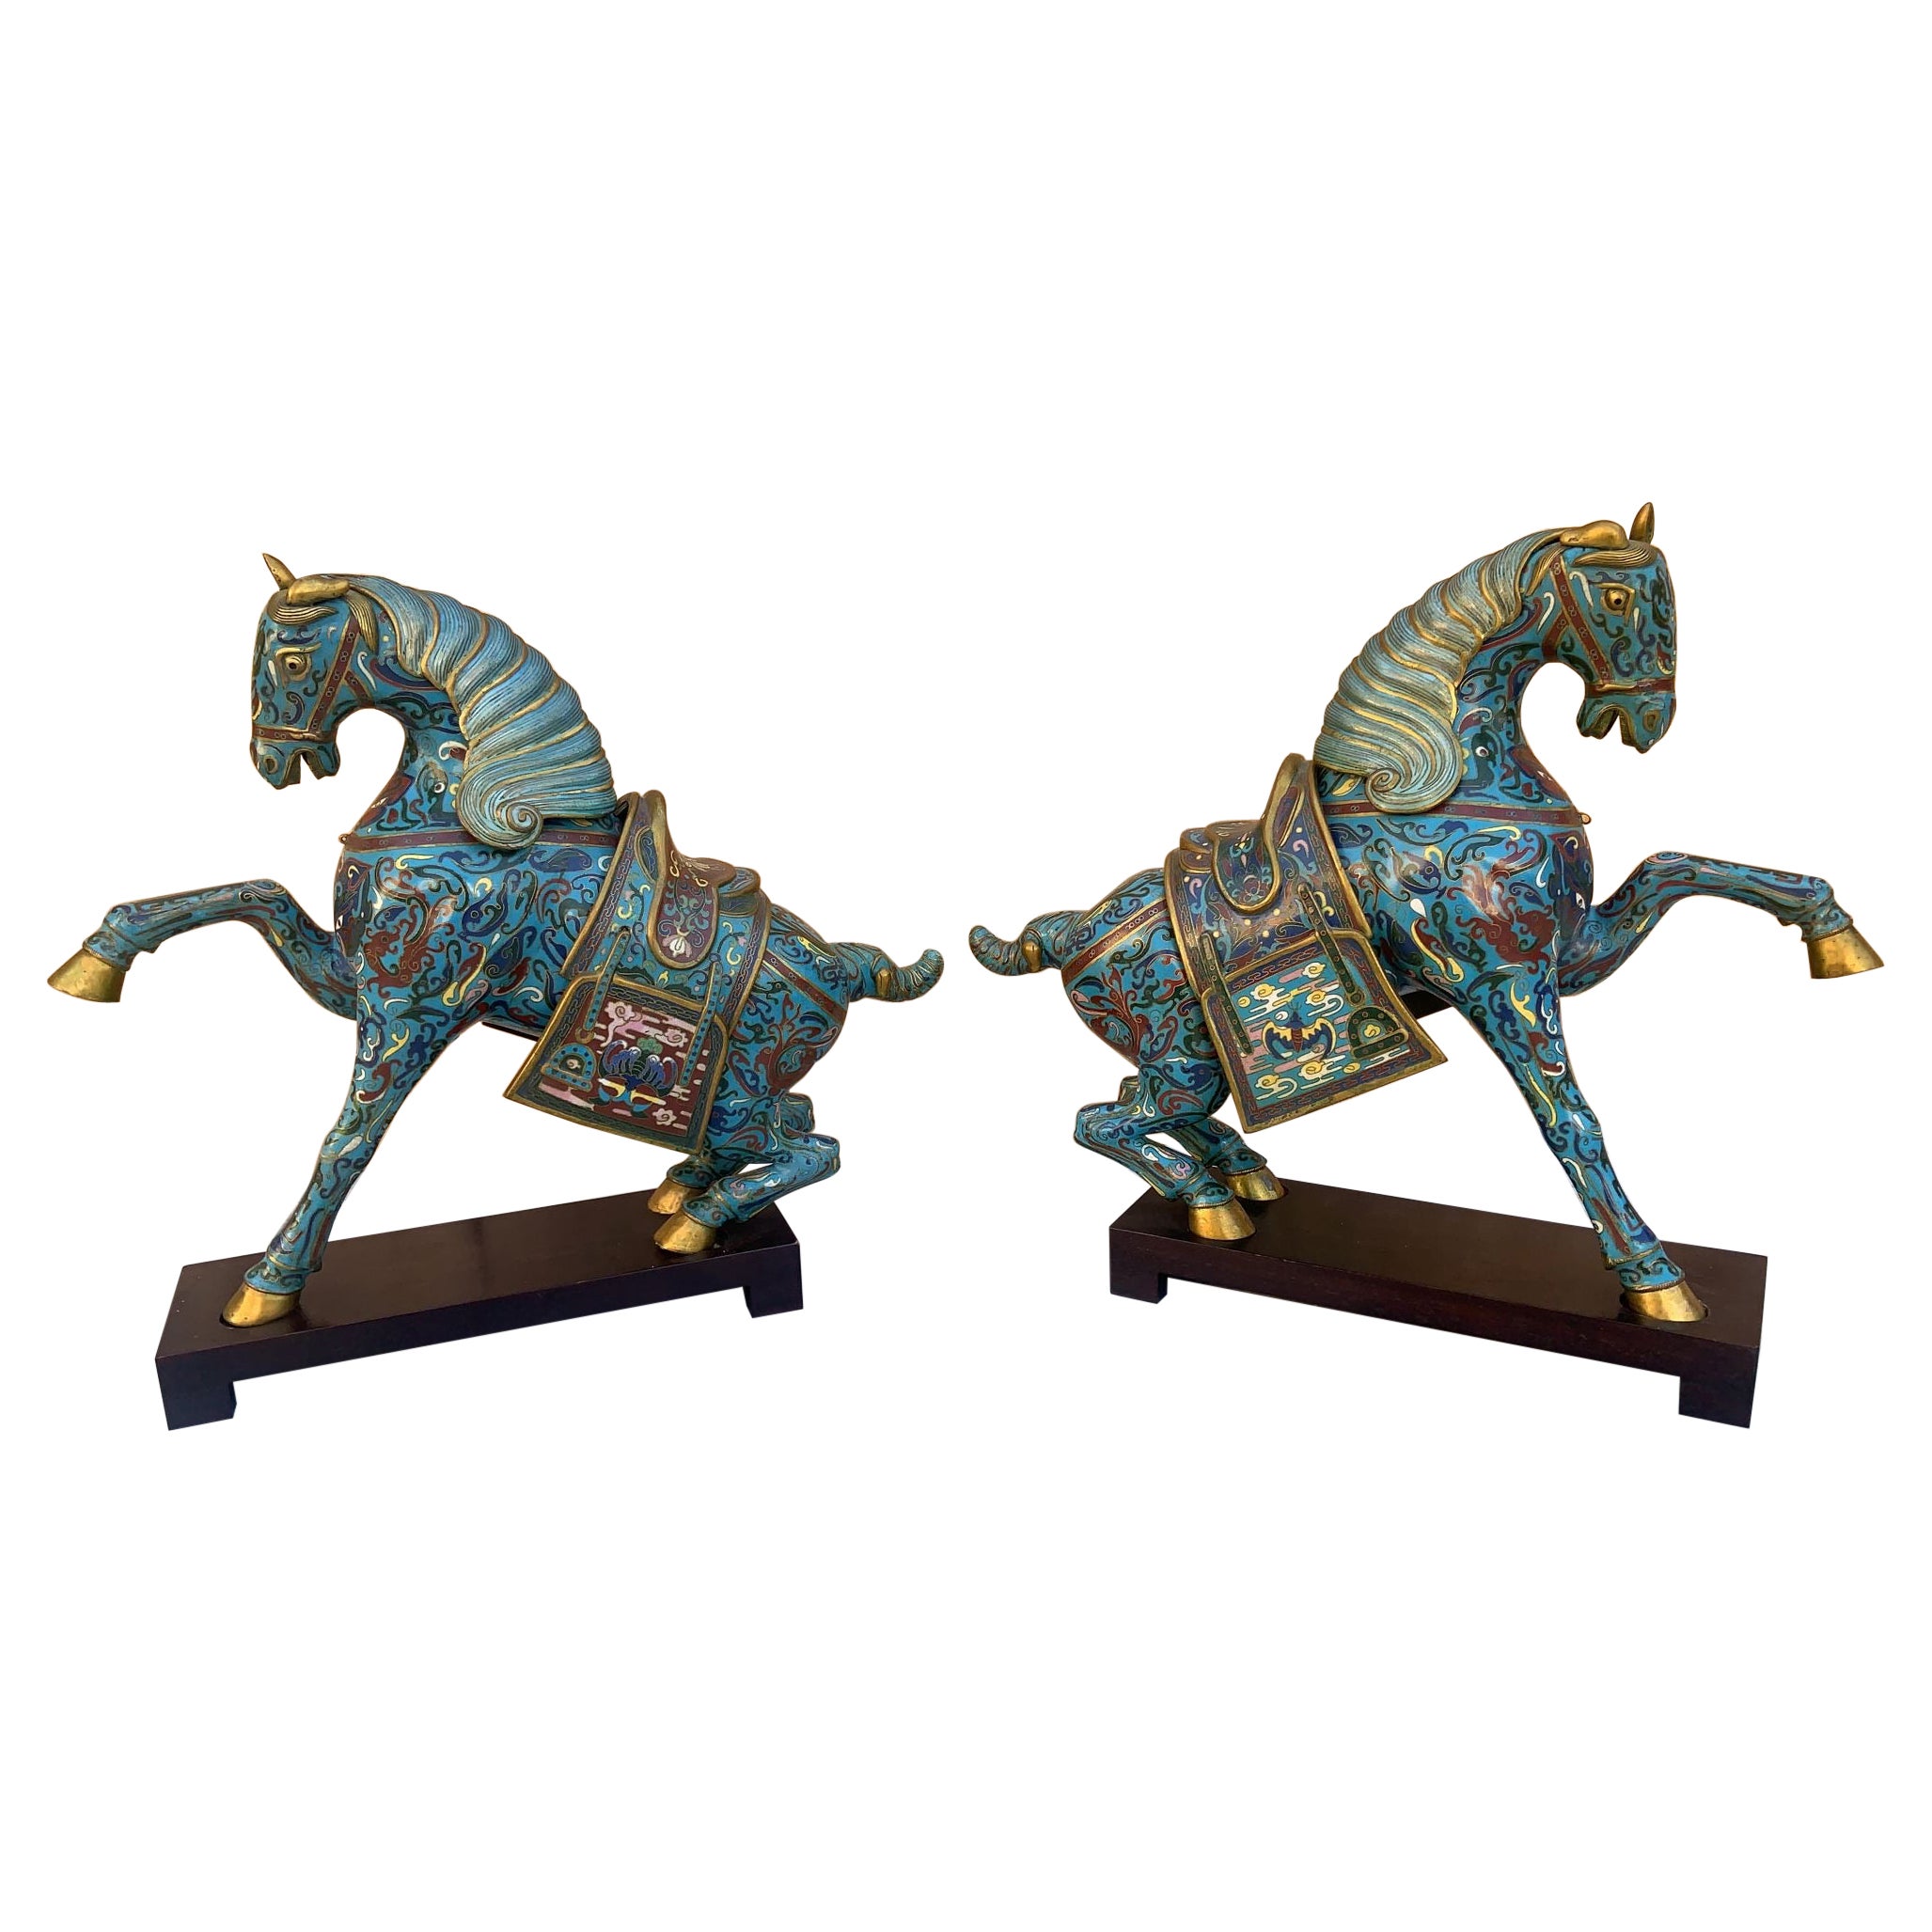 Vintage Chinese Cloisonné War Horse Sculptures on Mahogany Base - Pair For Sale